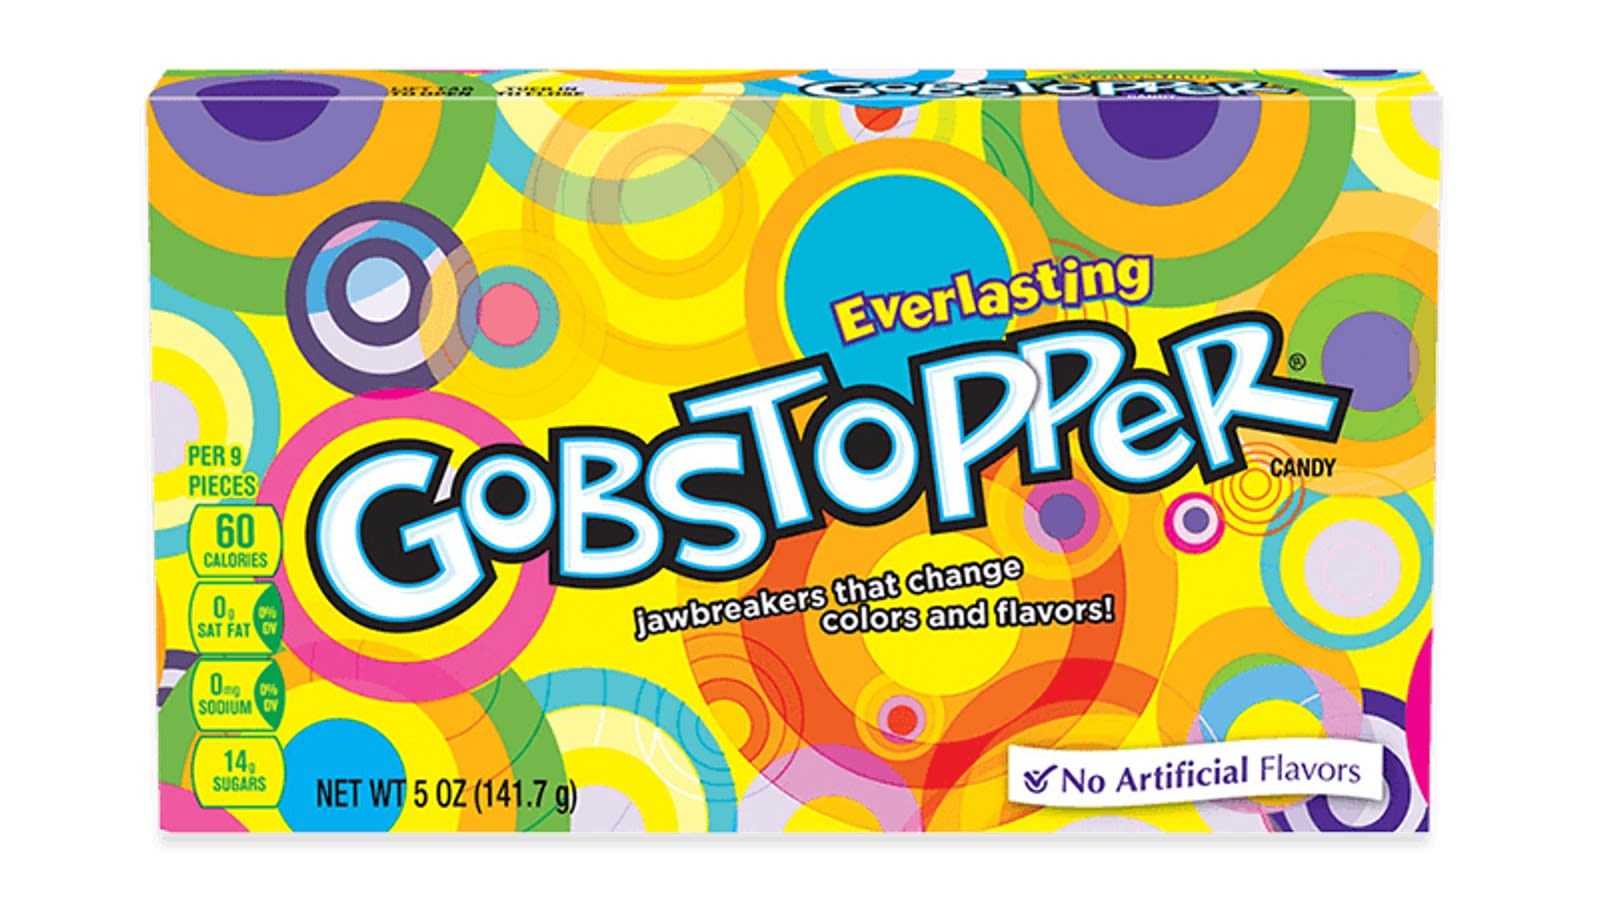 Are Everlasting Gobstopper Candies Discontinued?